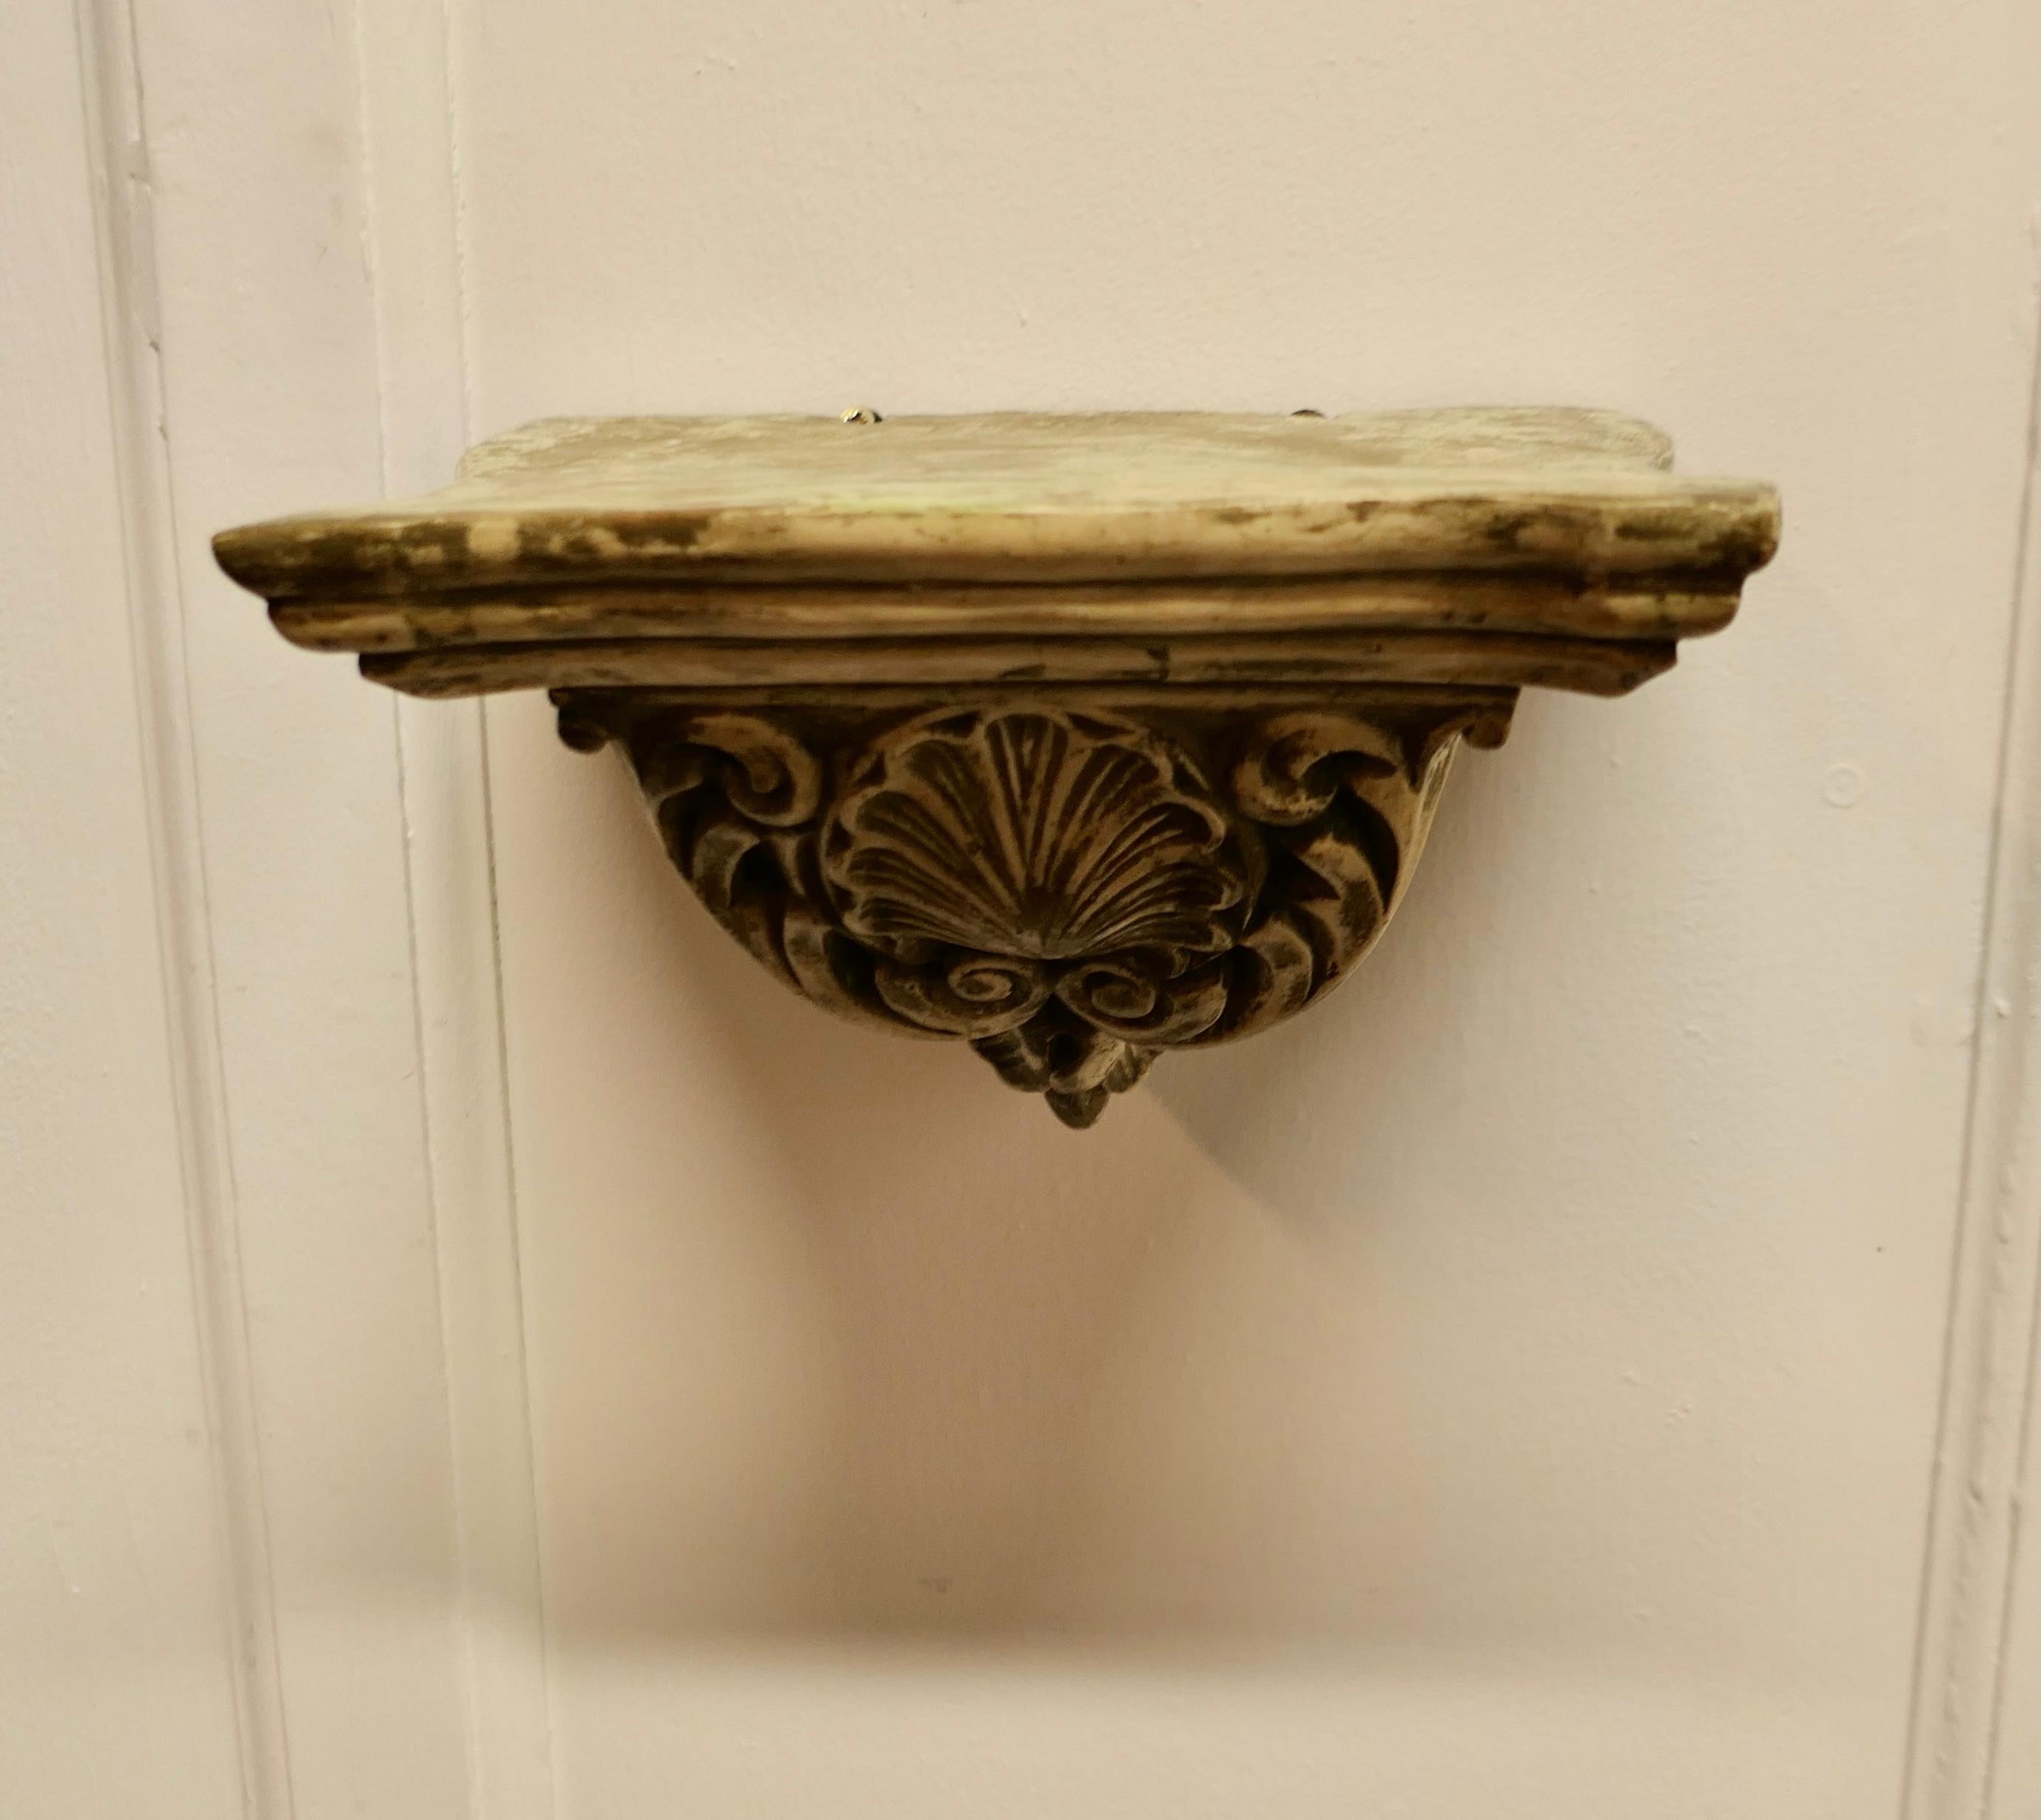 Plaster Weathered Wall Bracket, carved with Shell Decoration  This is a well weathered p For Sale